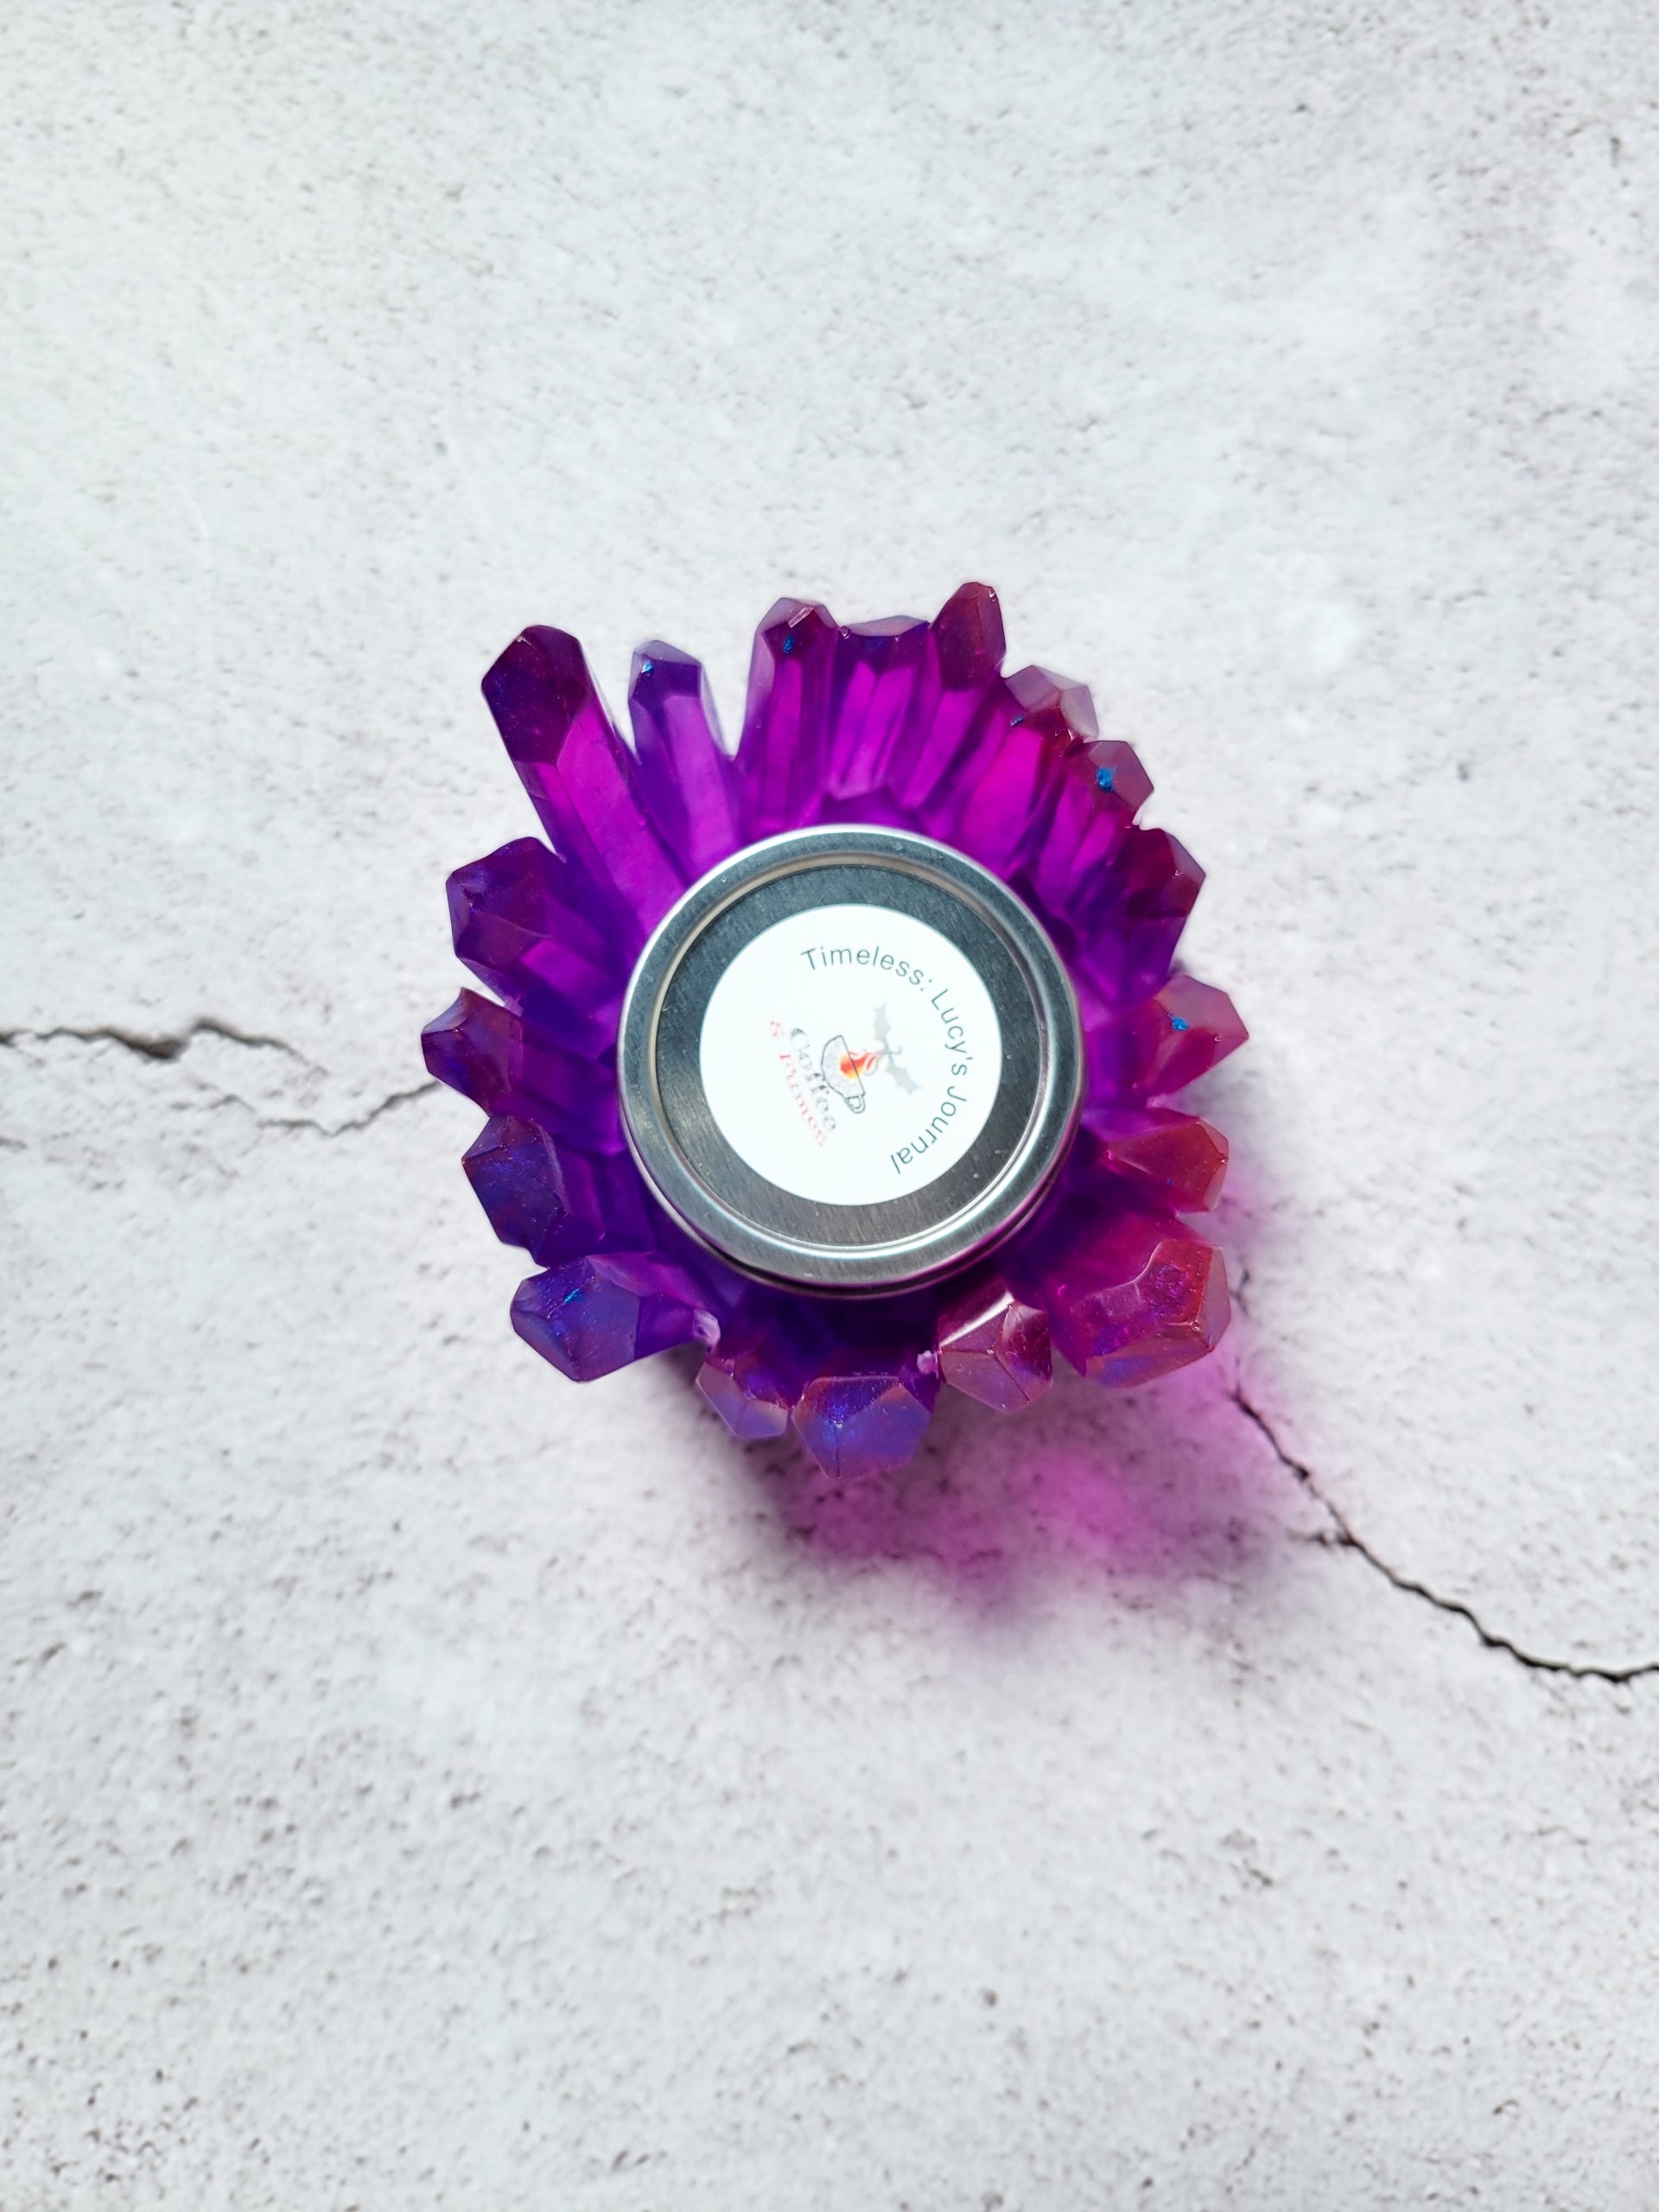 A birds eye view of a tealight candle holder in the style of crystals forming a circle. The crystals are varying heights. They are a translucent purple red color. There is a tealight candle inside to show size comparison.